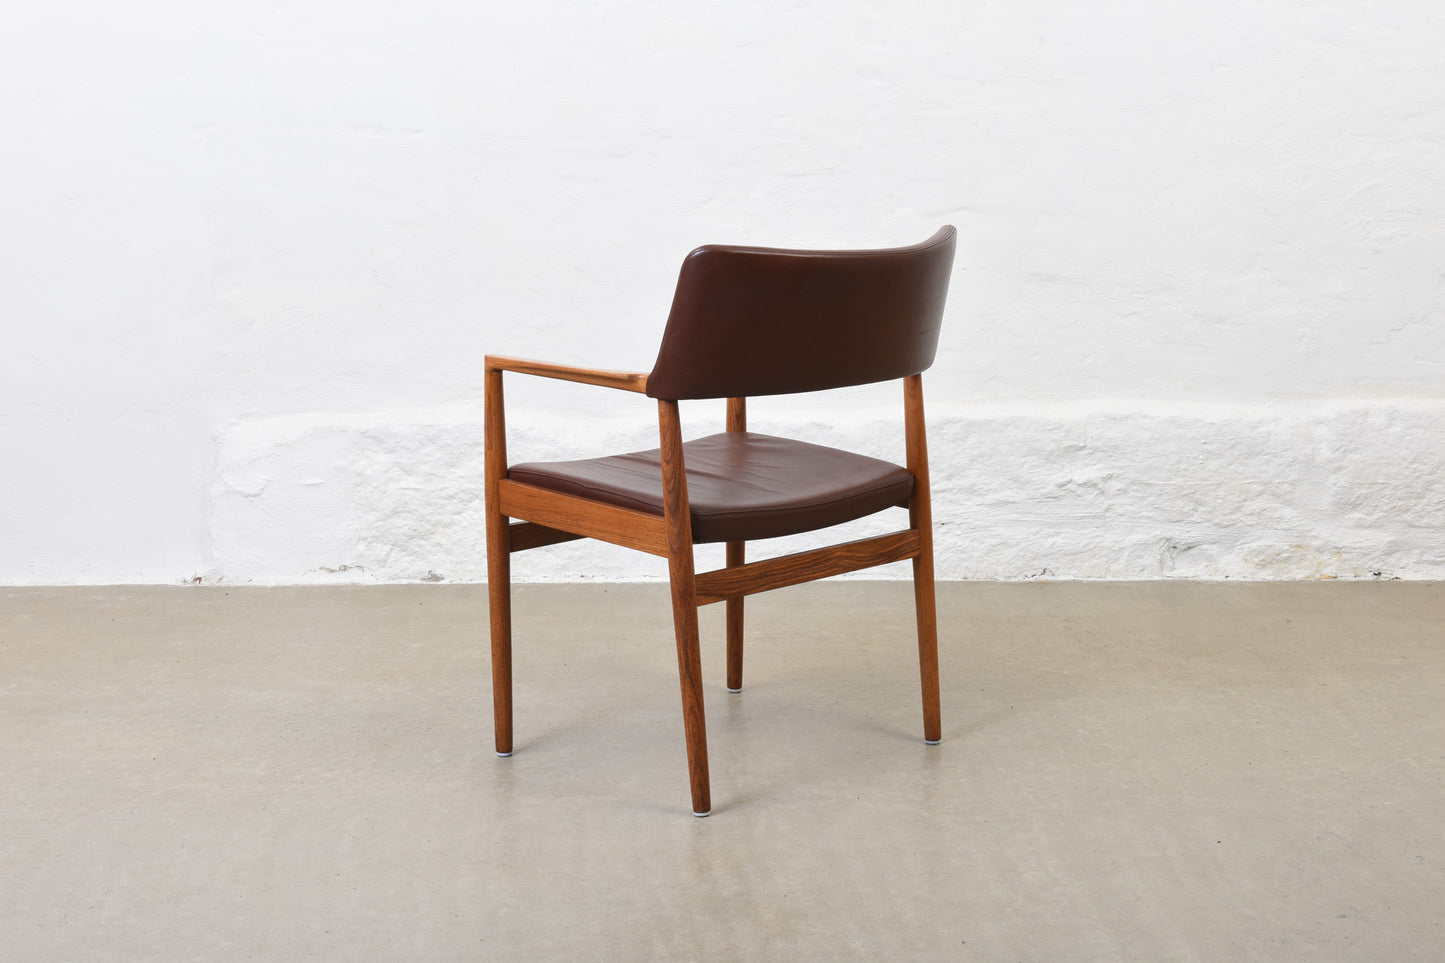 1960s rosewood armchair by Eric Wørts